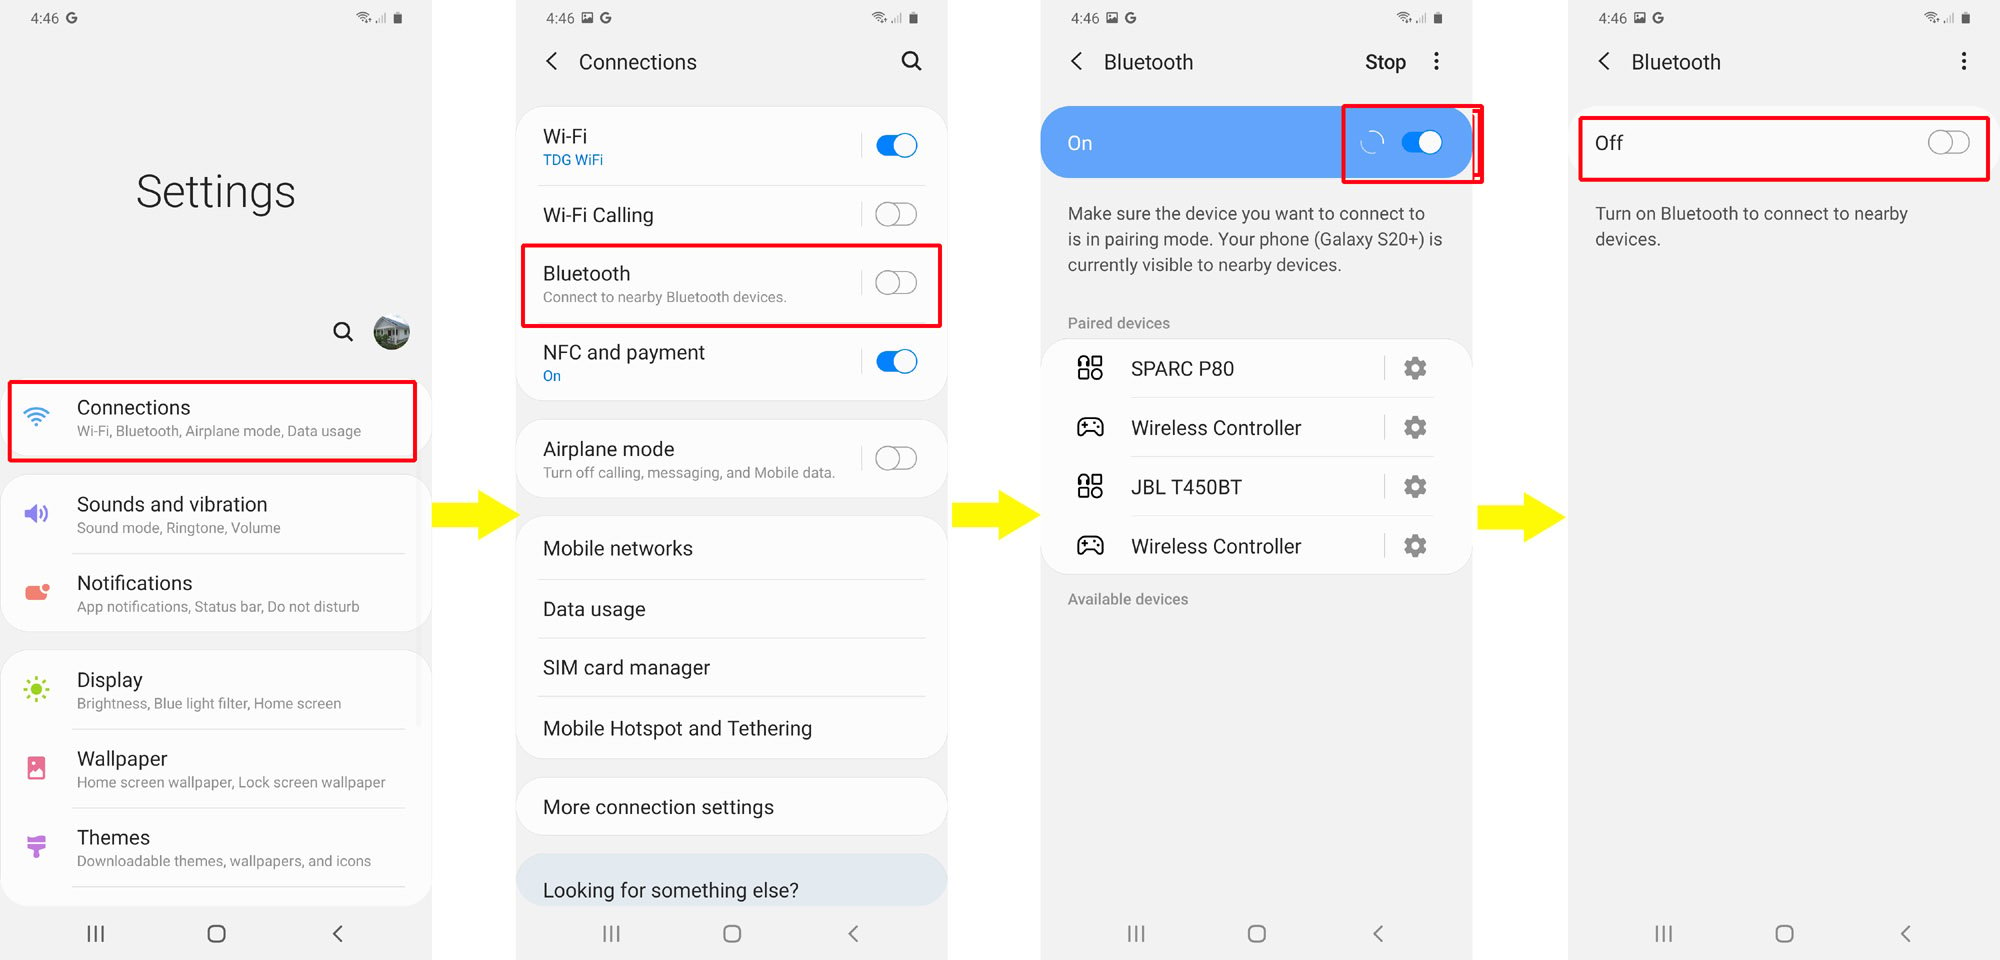 fix galaxy s20 bluetooth issues - turn bluetooth off and on